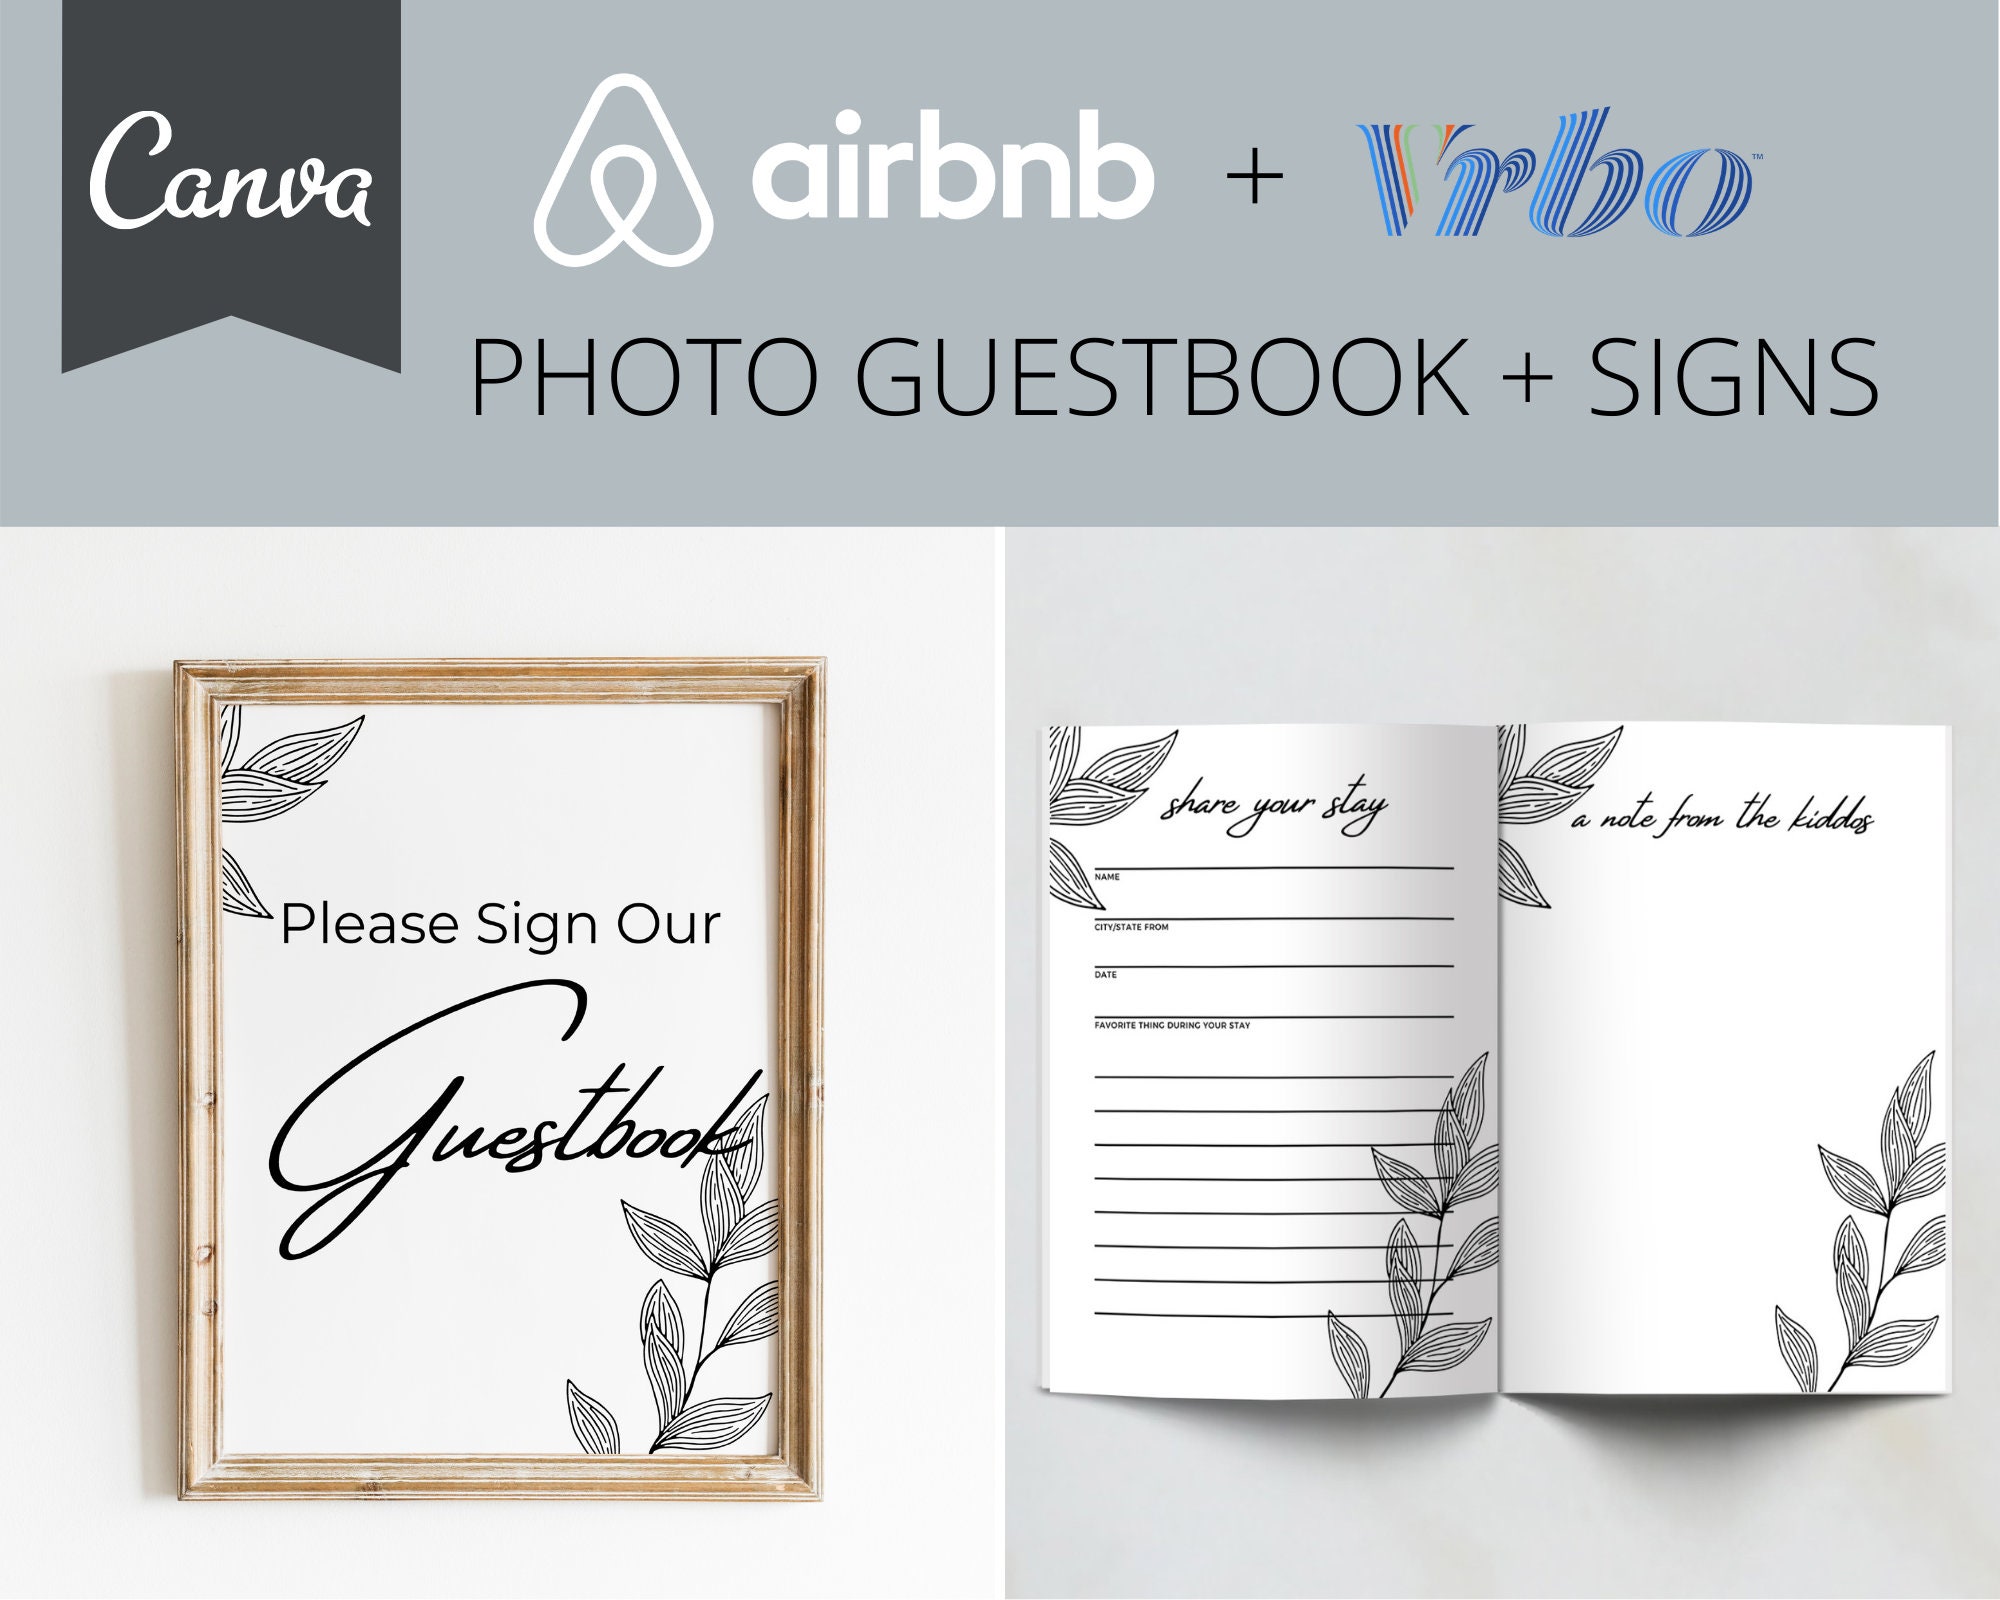 airbnb-guestbook-sign-and-pages-airbnb-vrbo-guestbook-etsy-france